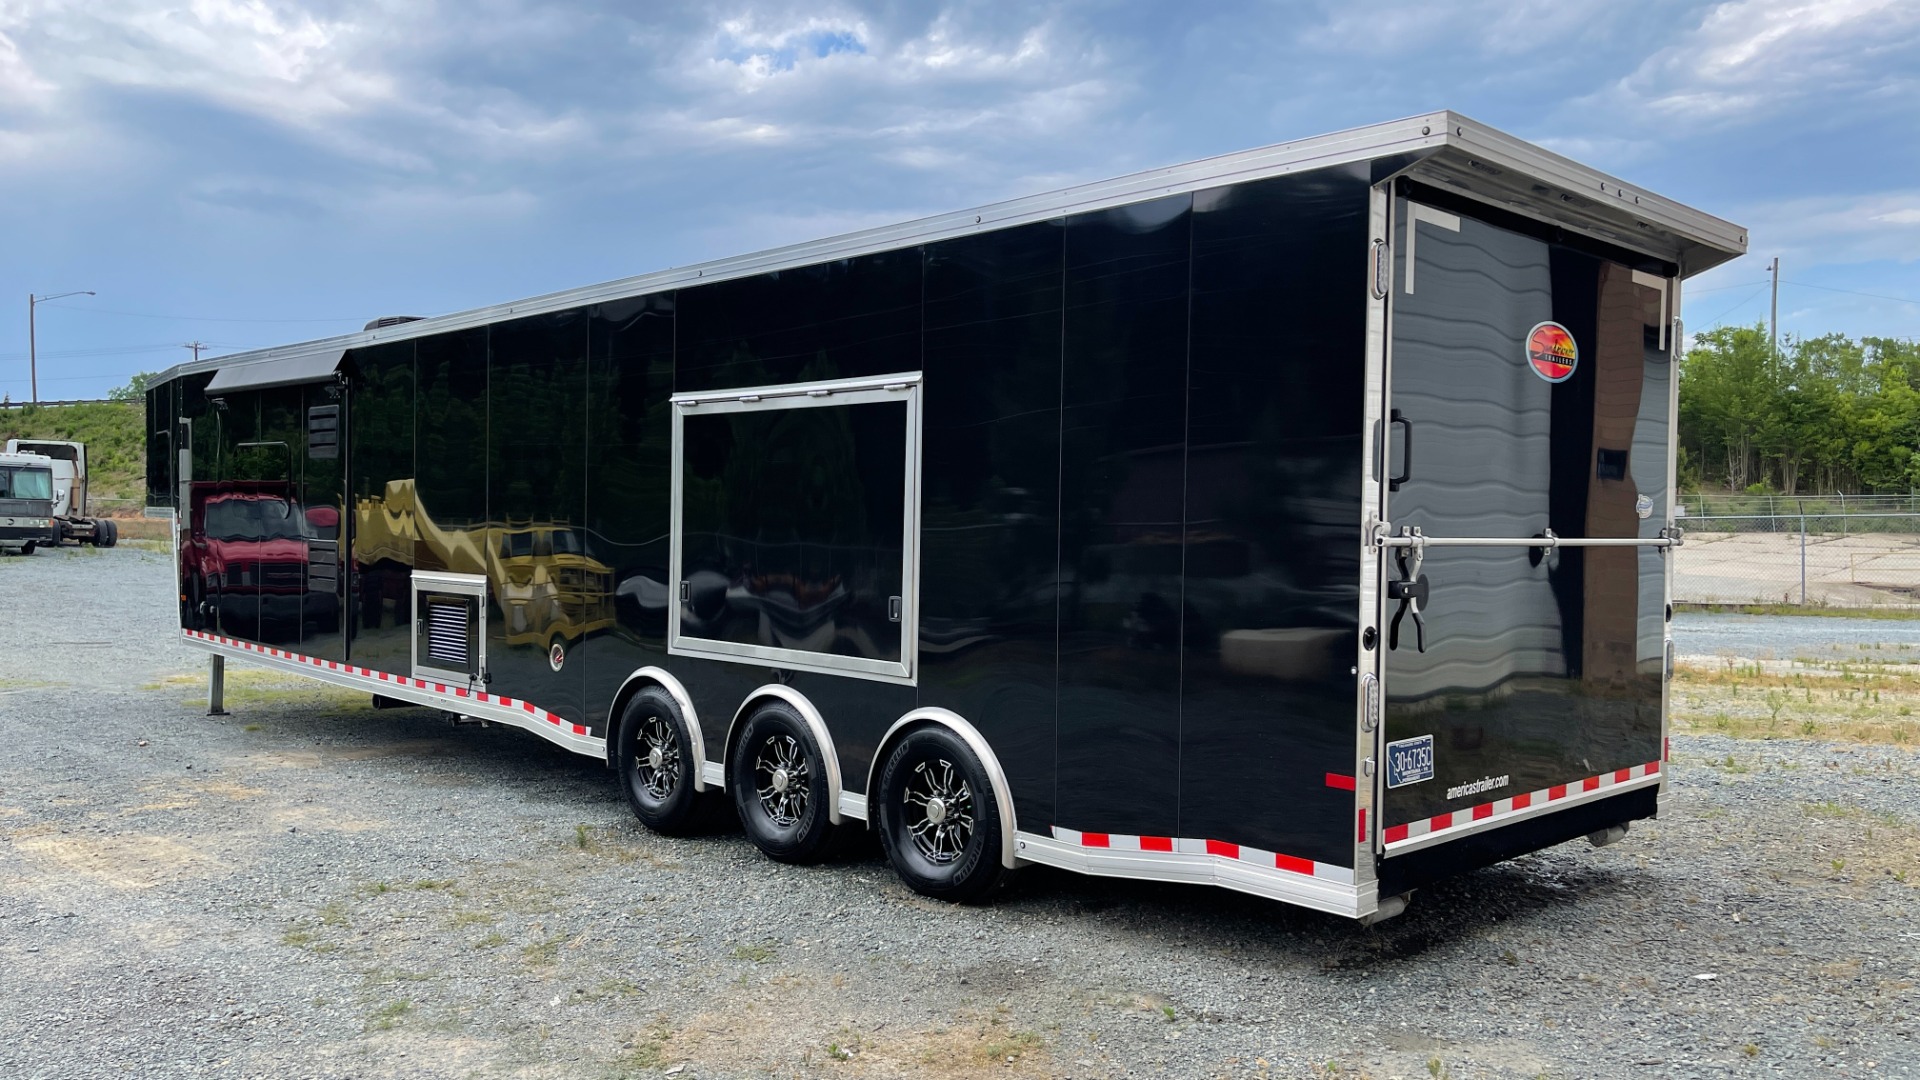 Used 2020 Sundowner 2986 SGM TOY HAULER 49FT / 29FT LIVING / 20FT FOR TOYS / TRIPLE-AXLE for sale $115,000 at Formula Imports in Charlotte NC 28227 3